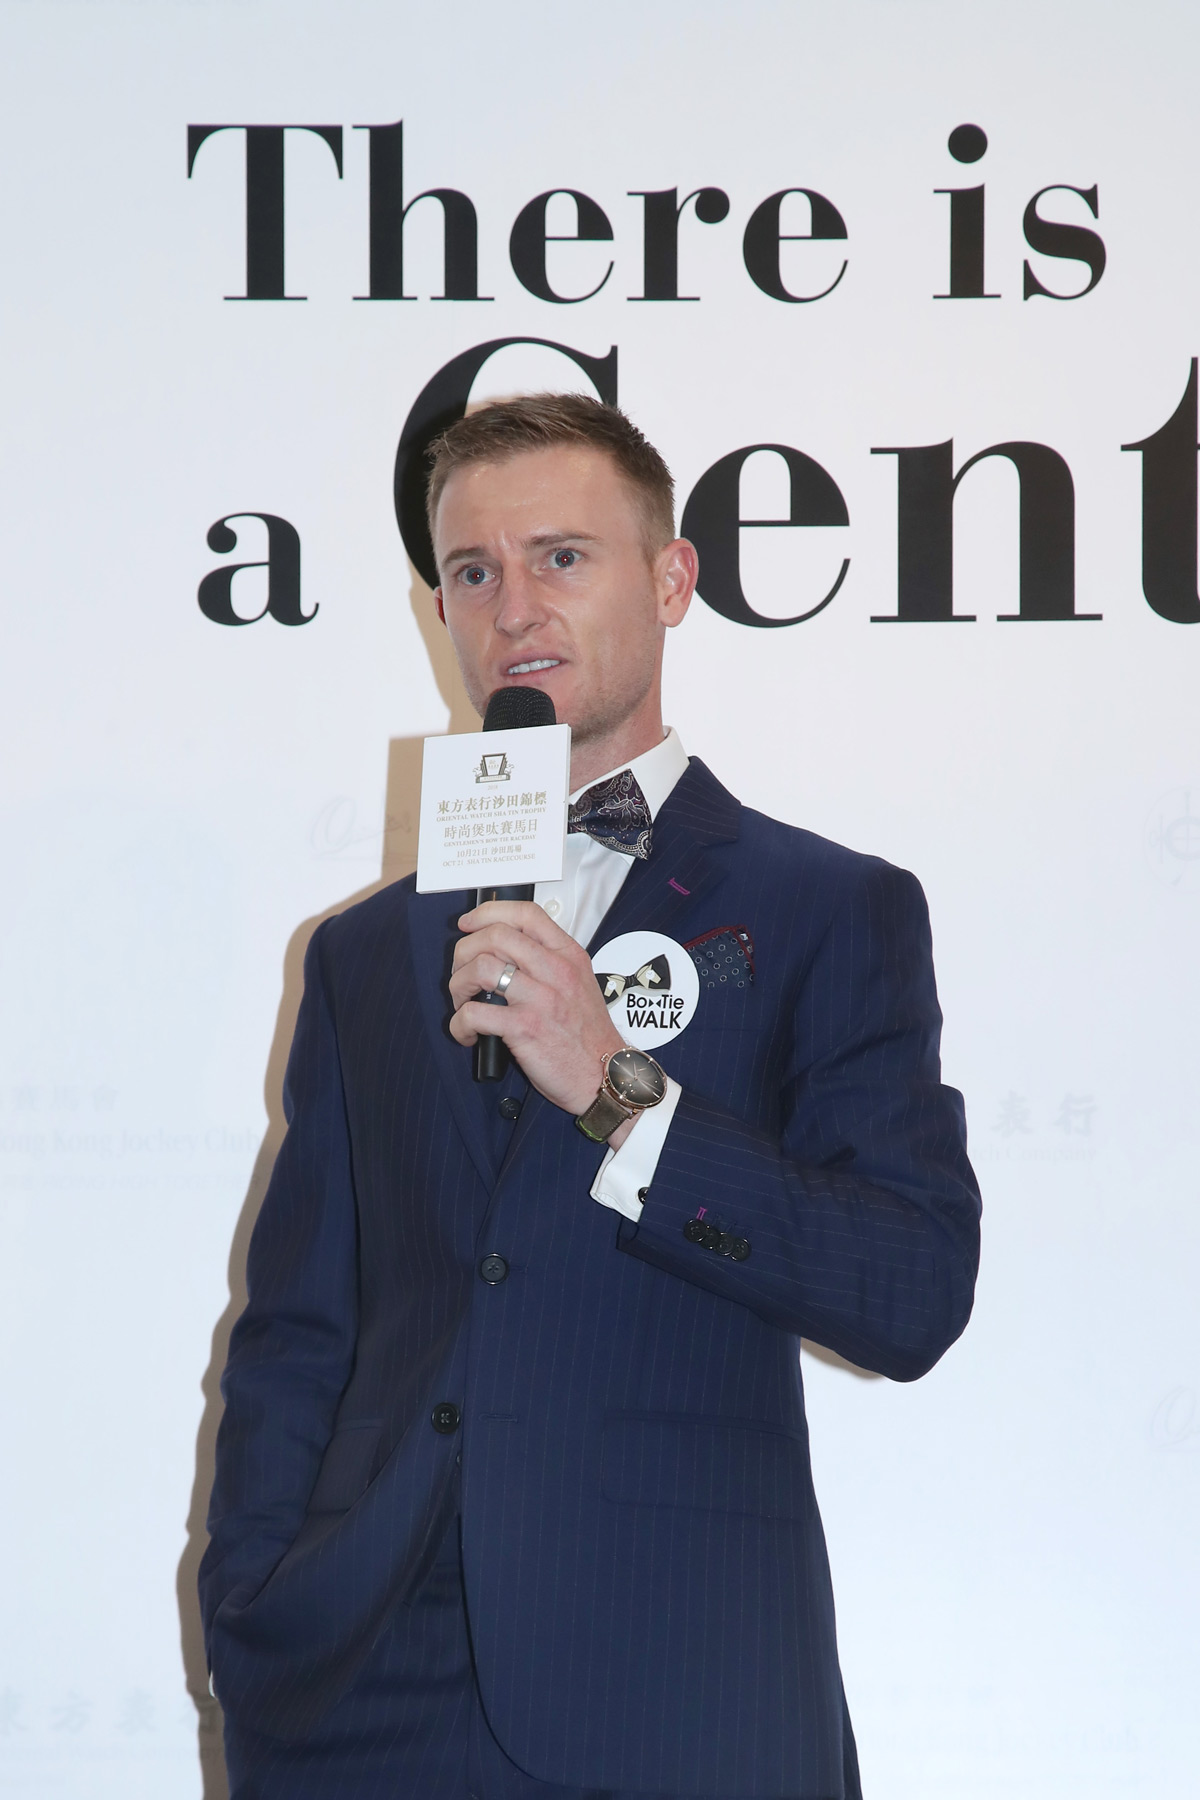 Champion jockey Zac Purton shares his interpretations of a fine gentleman. He thinks gentleman always gives his best at what he does, and for him, it is to tap the potential of the horses he rides.